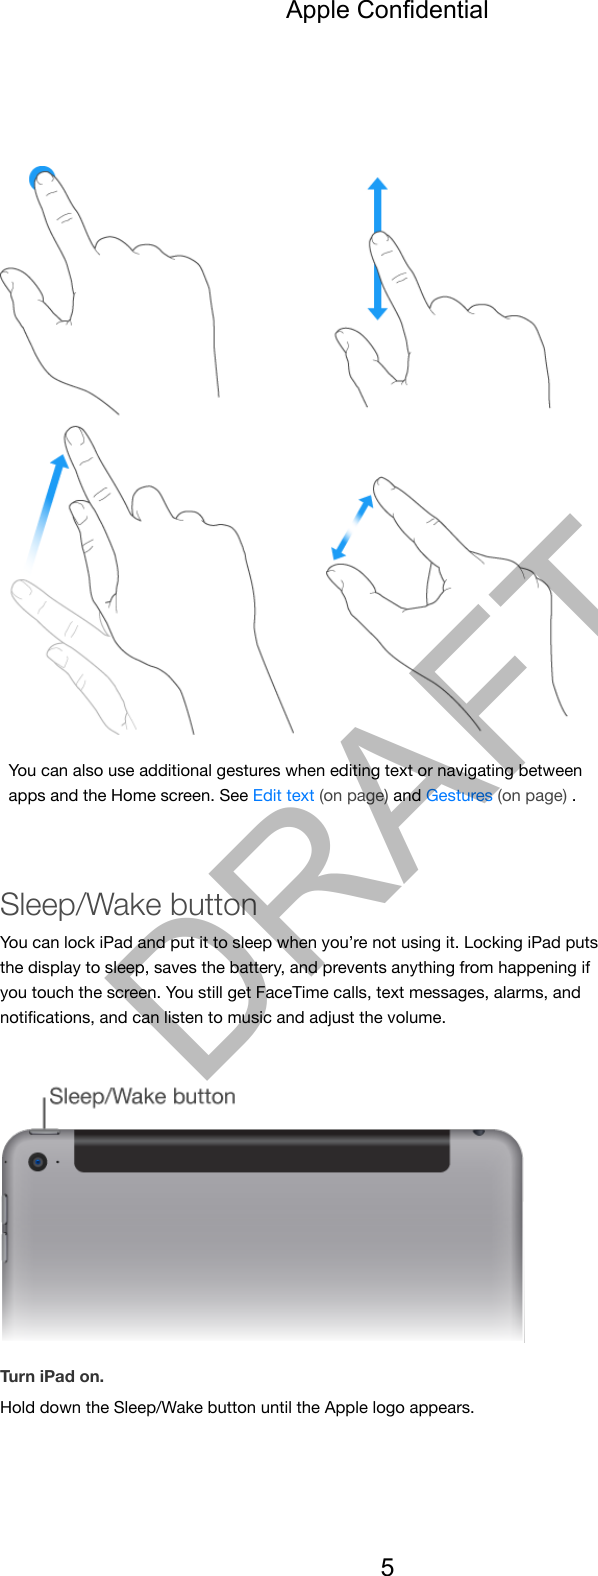 You can also use additional gestures when editing text or navigating betweenapps and the Home screen. See Edit text (on page) and Gestures (on page) .Sleep/Wake buttonYou can lock iPad and put it to sleep when you’re not using it. Locking iPad putsthe display to sleep, saves the battery, and prevents anything from happening ifyou touch the screen. You still get FaceTime calls, text messages, alarms, andnotiﬁcations, and can listen to music and adjust the volume.Turn iPad on.Hold down the Sleep/Wake button until the Apple logo appears.Apple Confidential5DRAFT